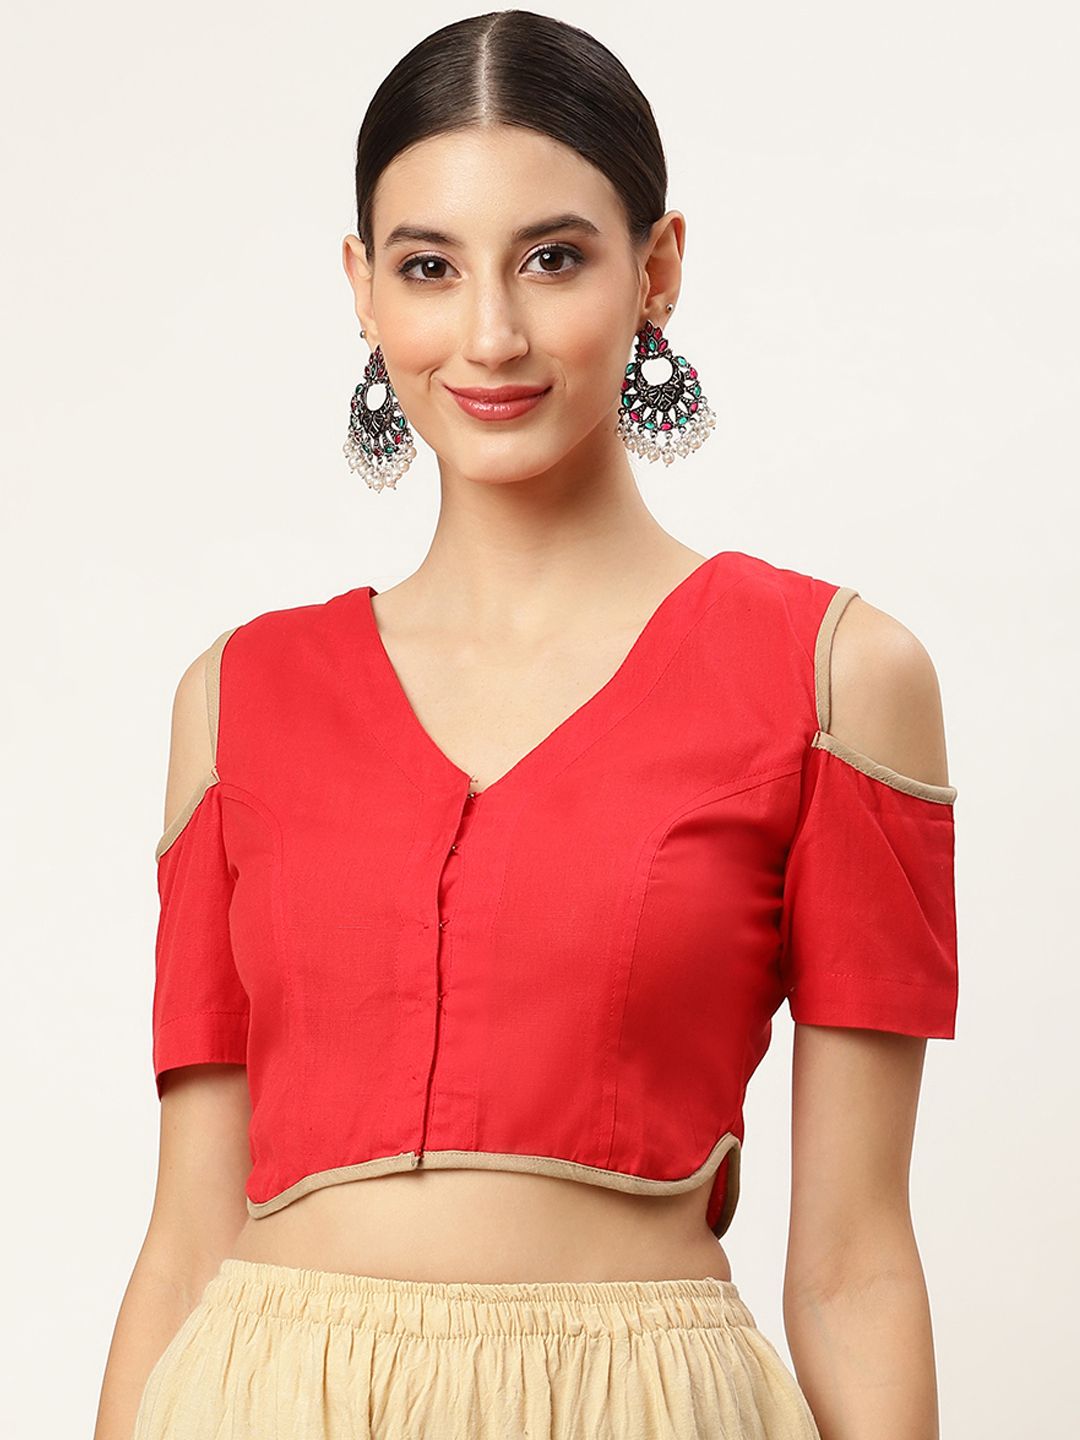 Molcha Red Solid Padded Saree Blouse Price in India